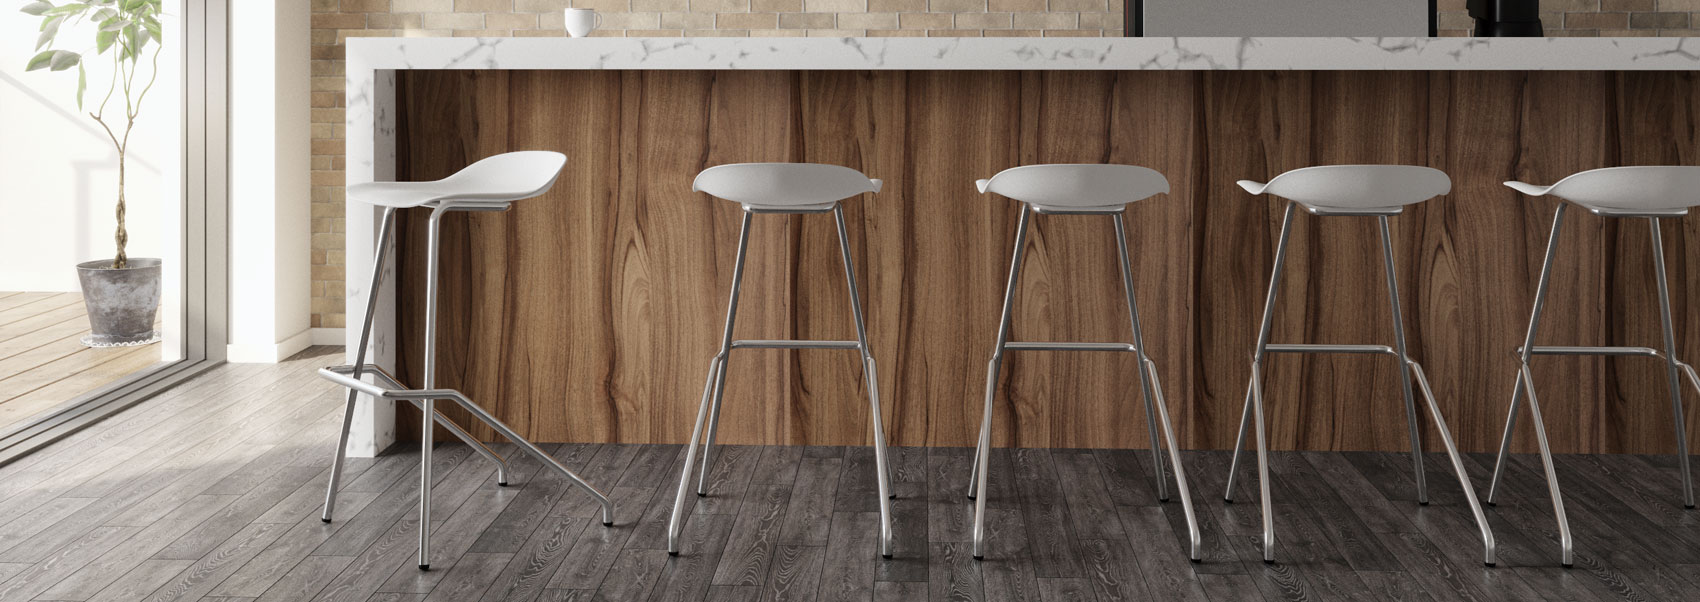 Bira high stools in white seat at a bar counter